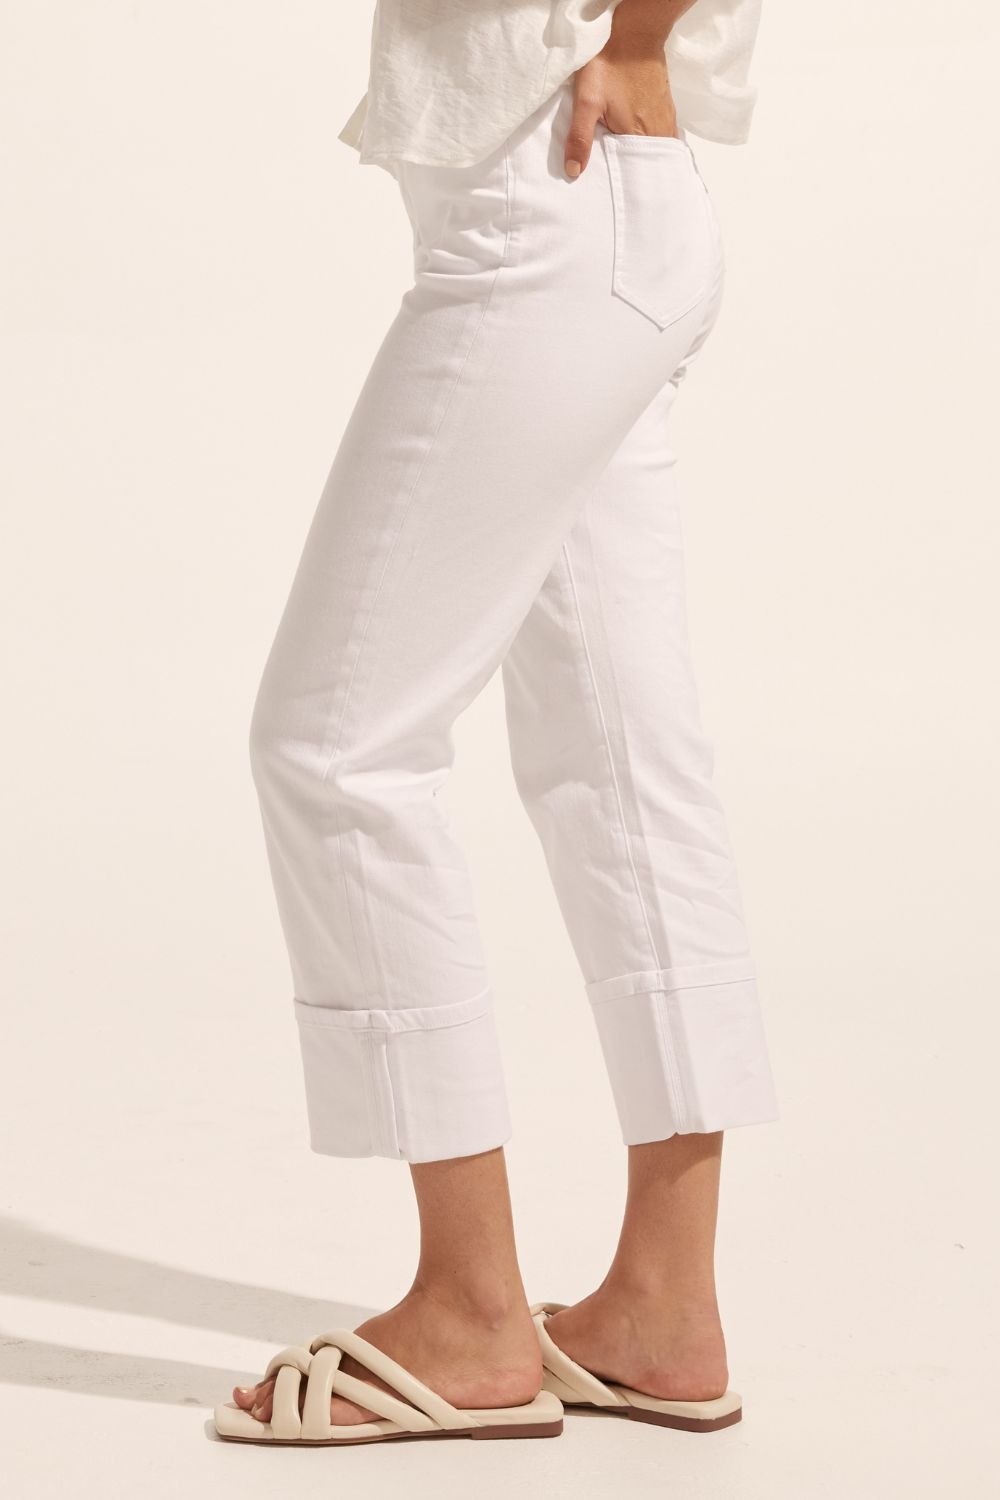 white, pant, cuffed jeans, mid rise jean, straight cut, side image